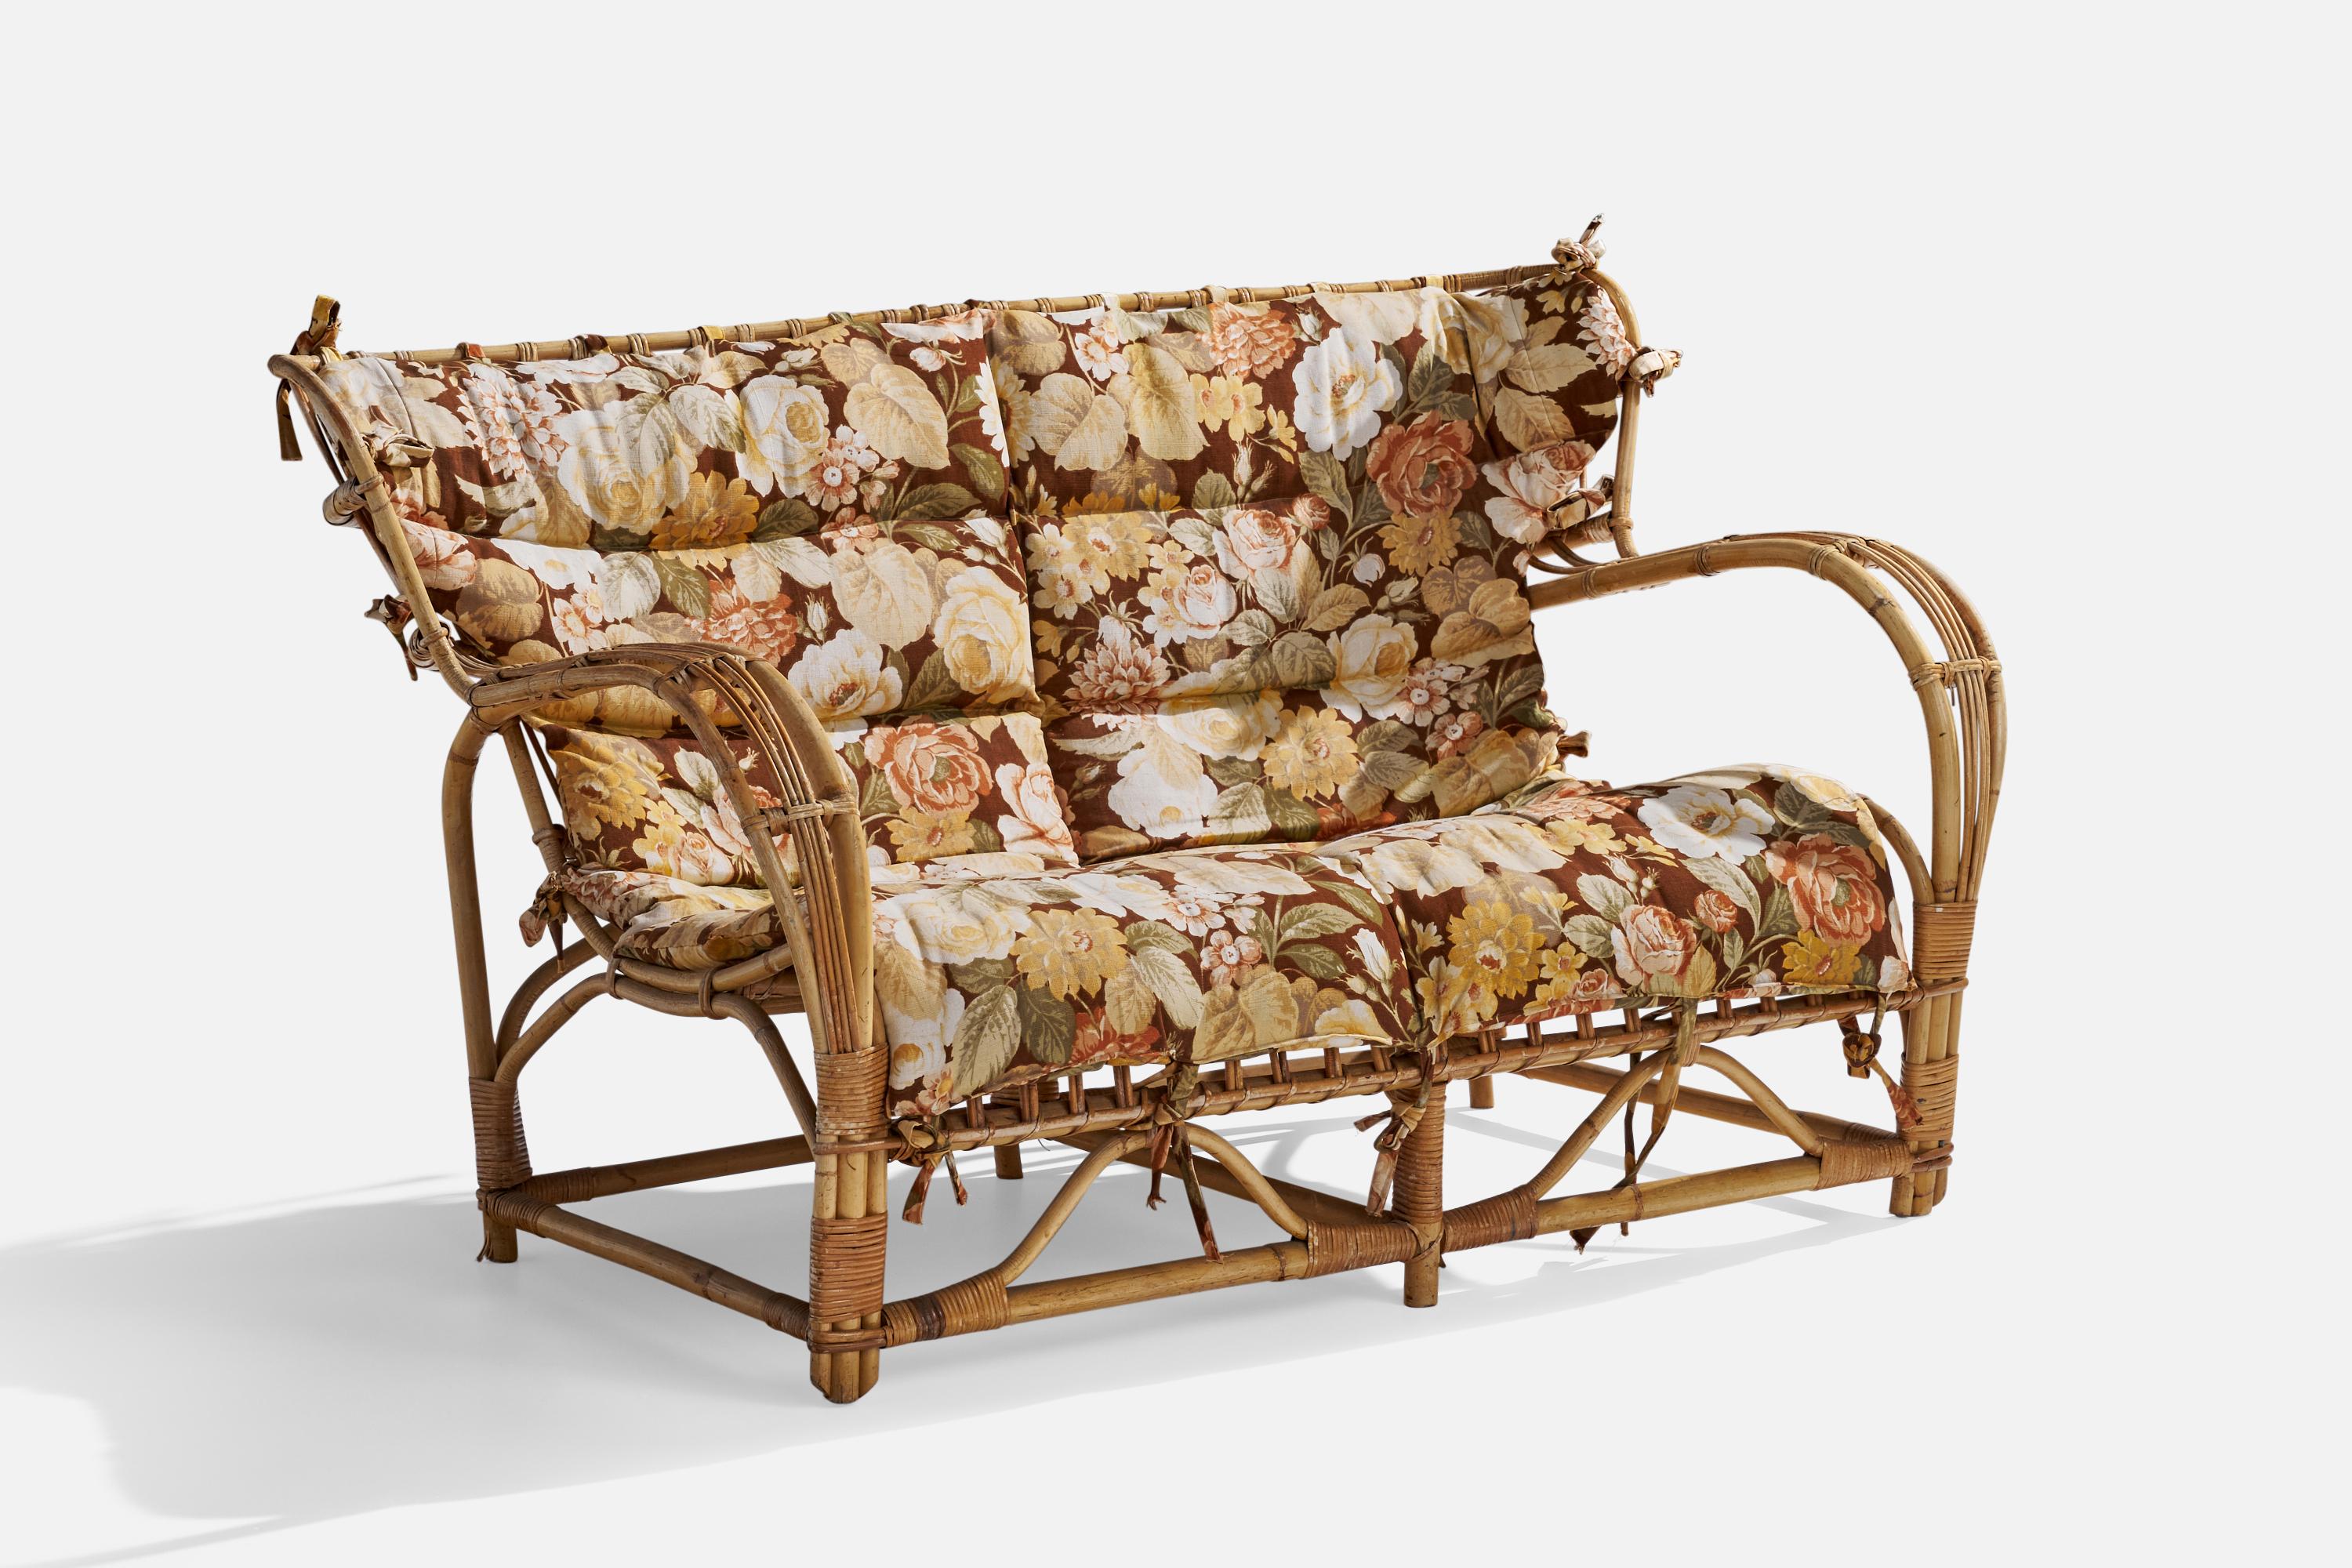 A moulded bamboo, rattan and floral-printed fabric sofa or settee attributed to Viggo Boesen and produced in Sweden, c. 1940s.

Seat height 15.5”.